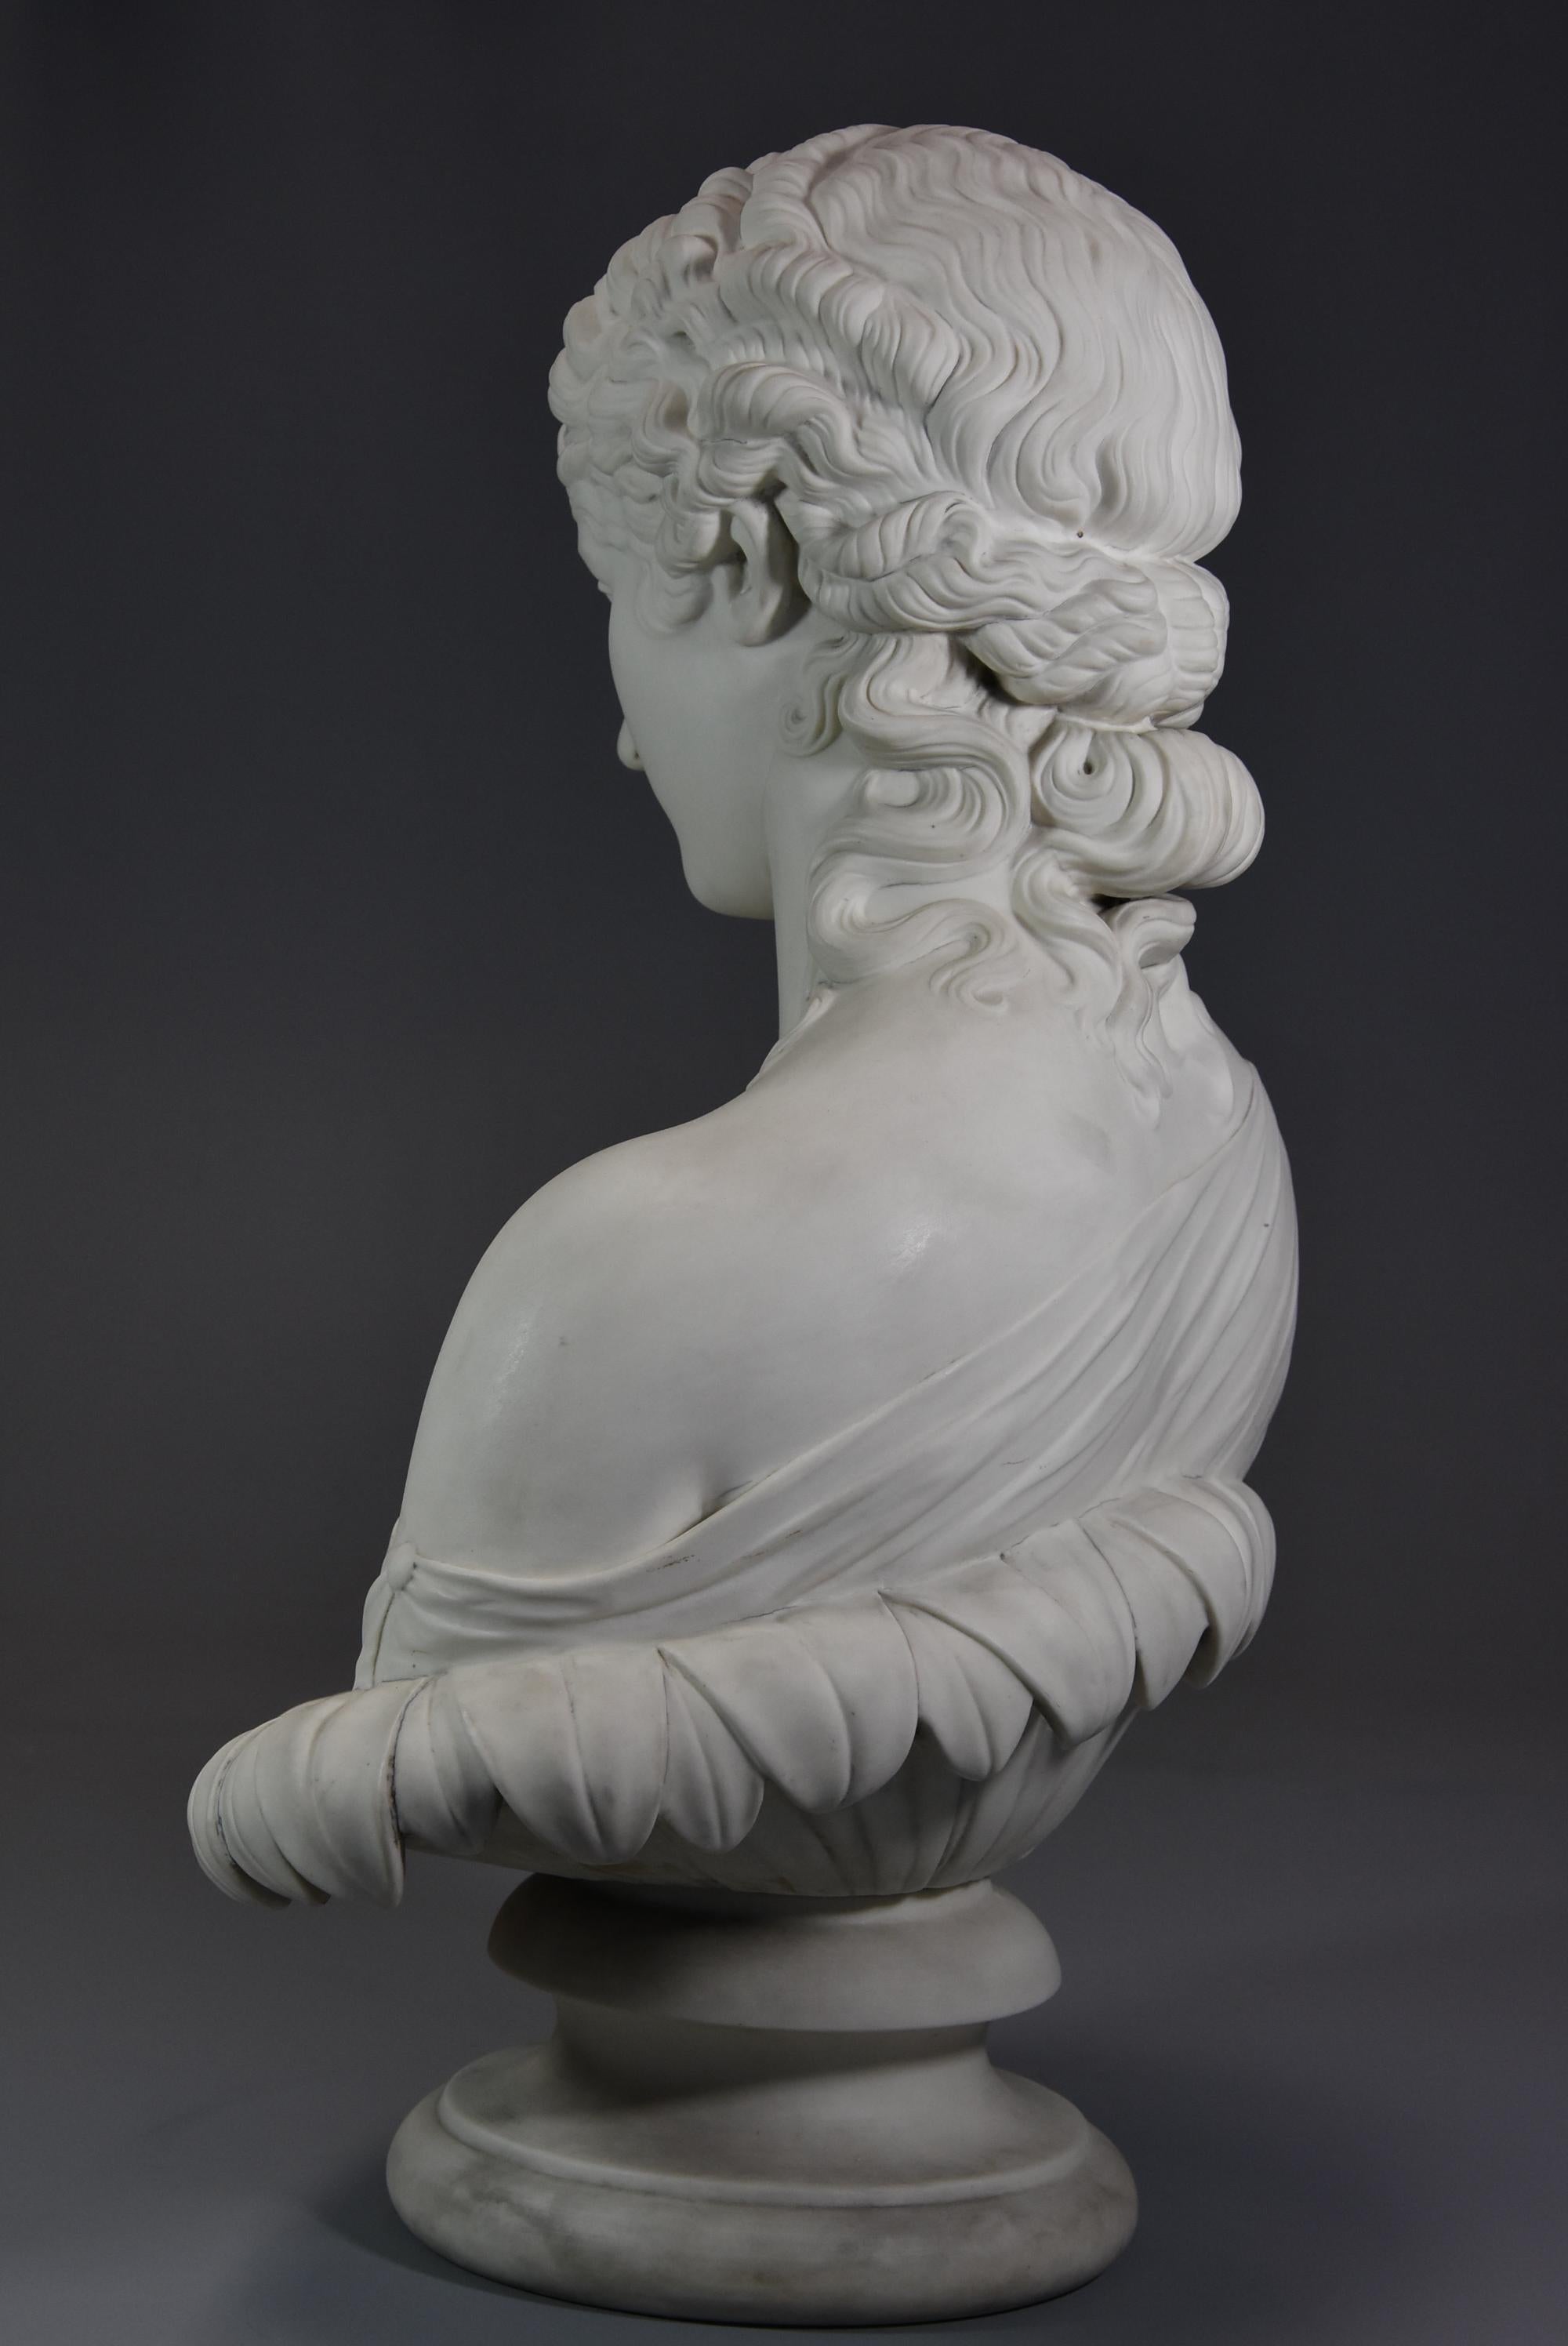 Decorative Large Mid-19th Century Parian Bust of ‘Clytie’, Stamped ‘Copeland' 2